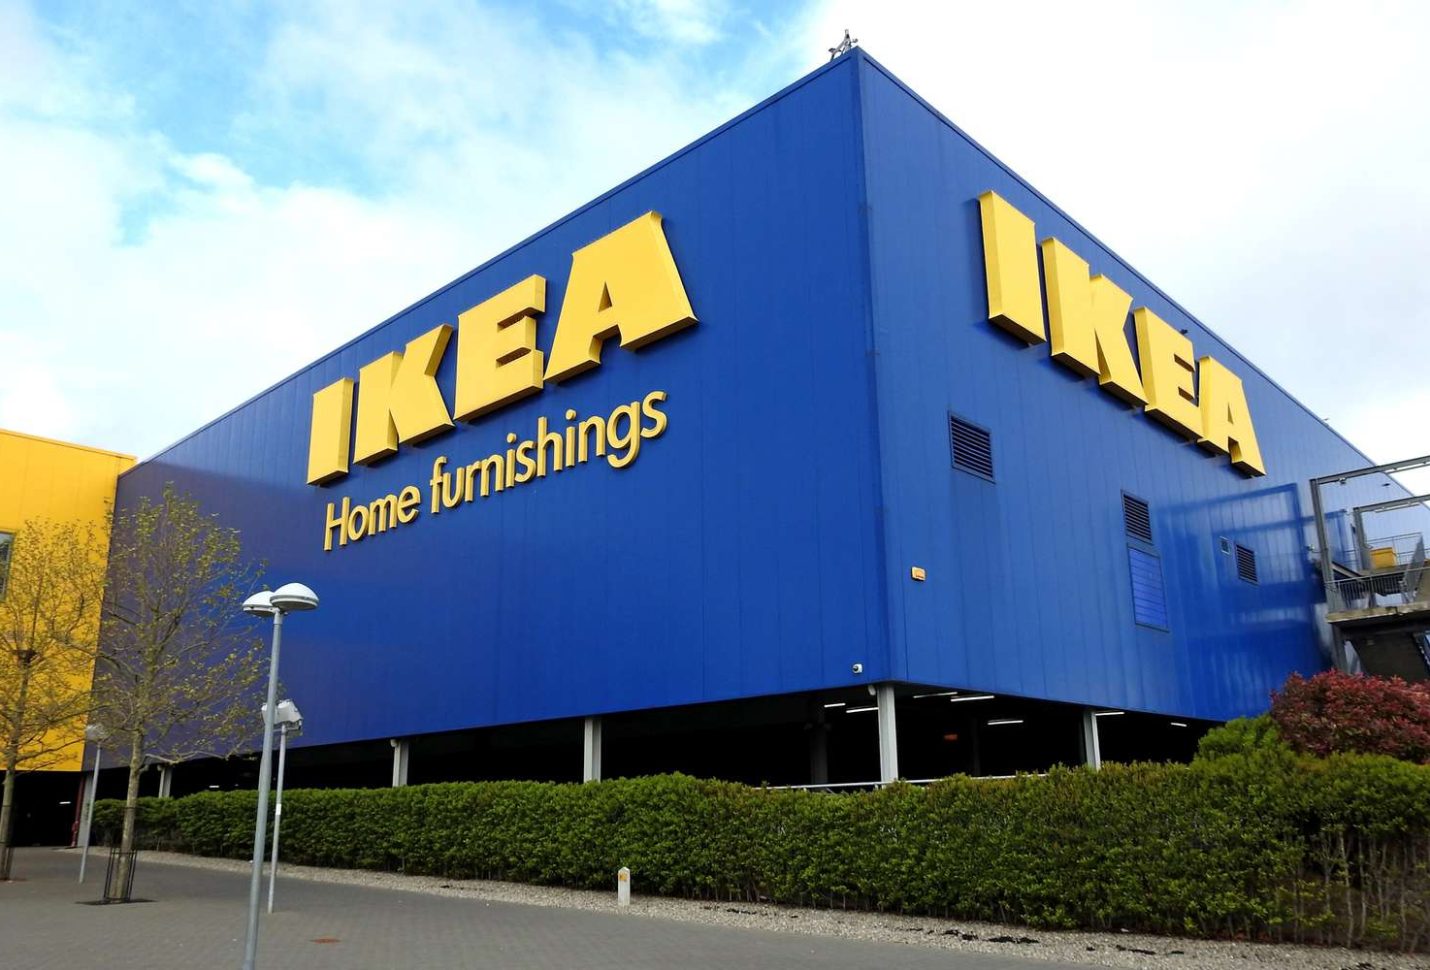 IKEA committed to become Net Zero latest by FY50